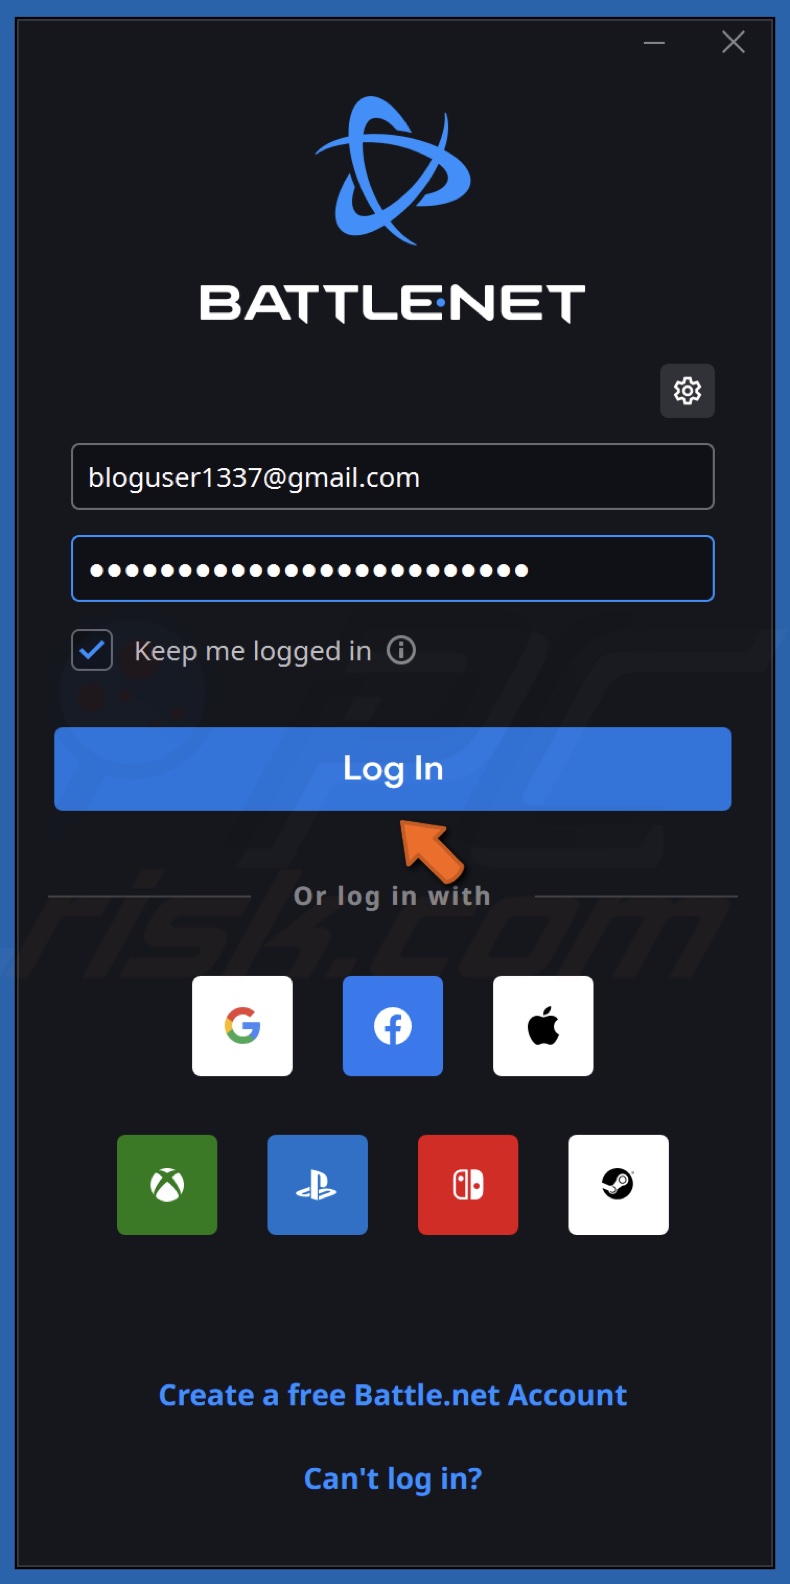 Enter your password and click Log In